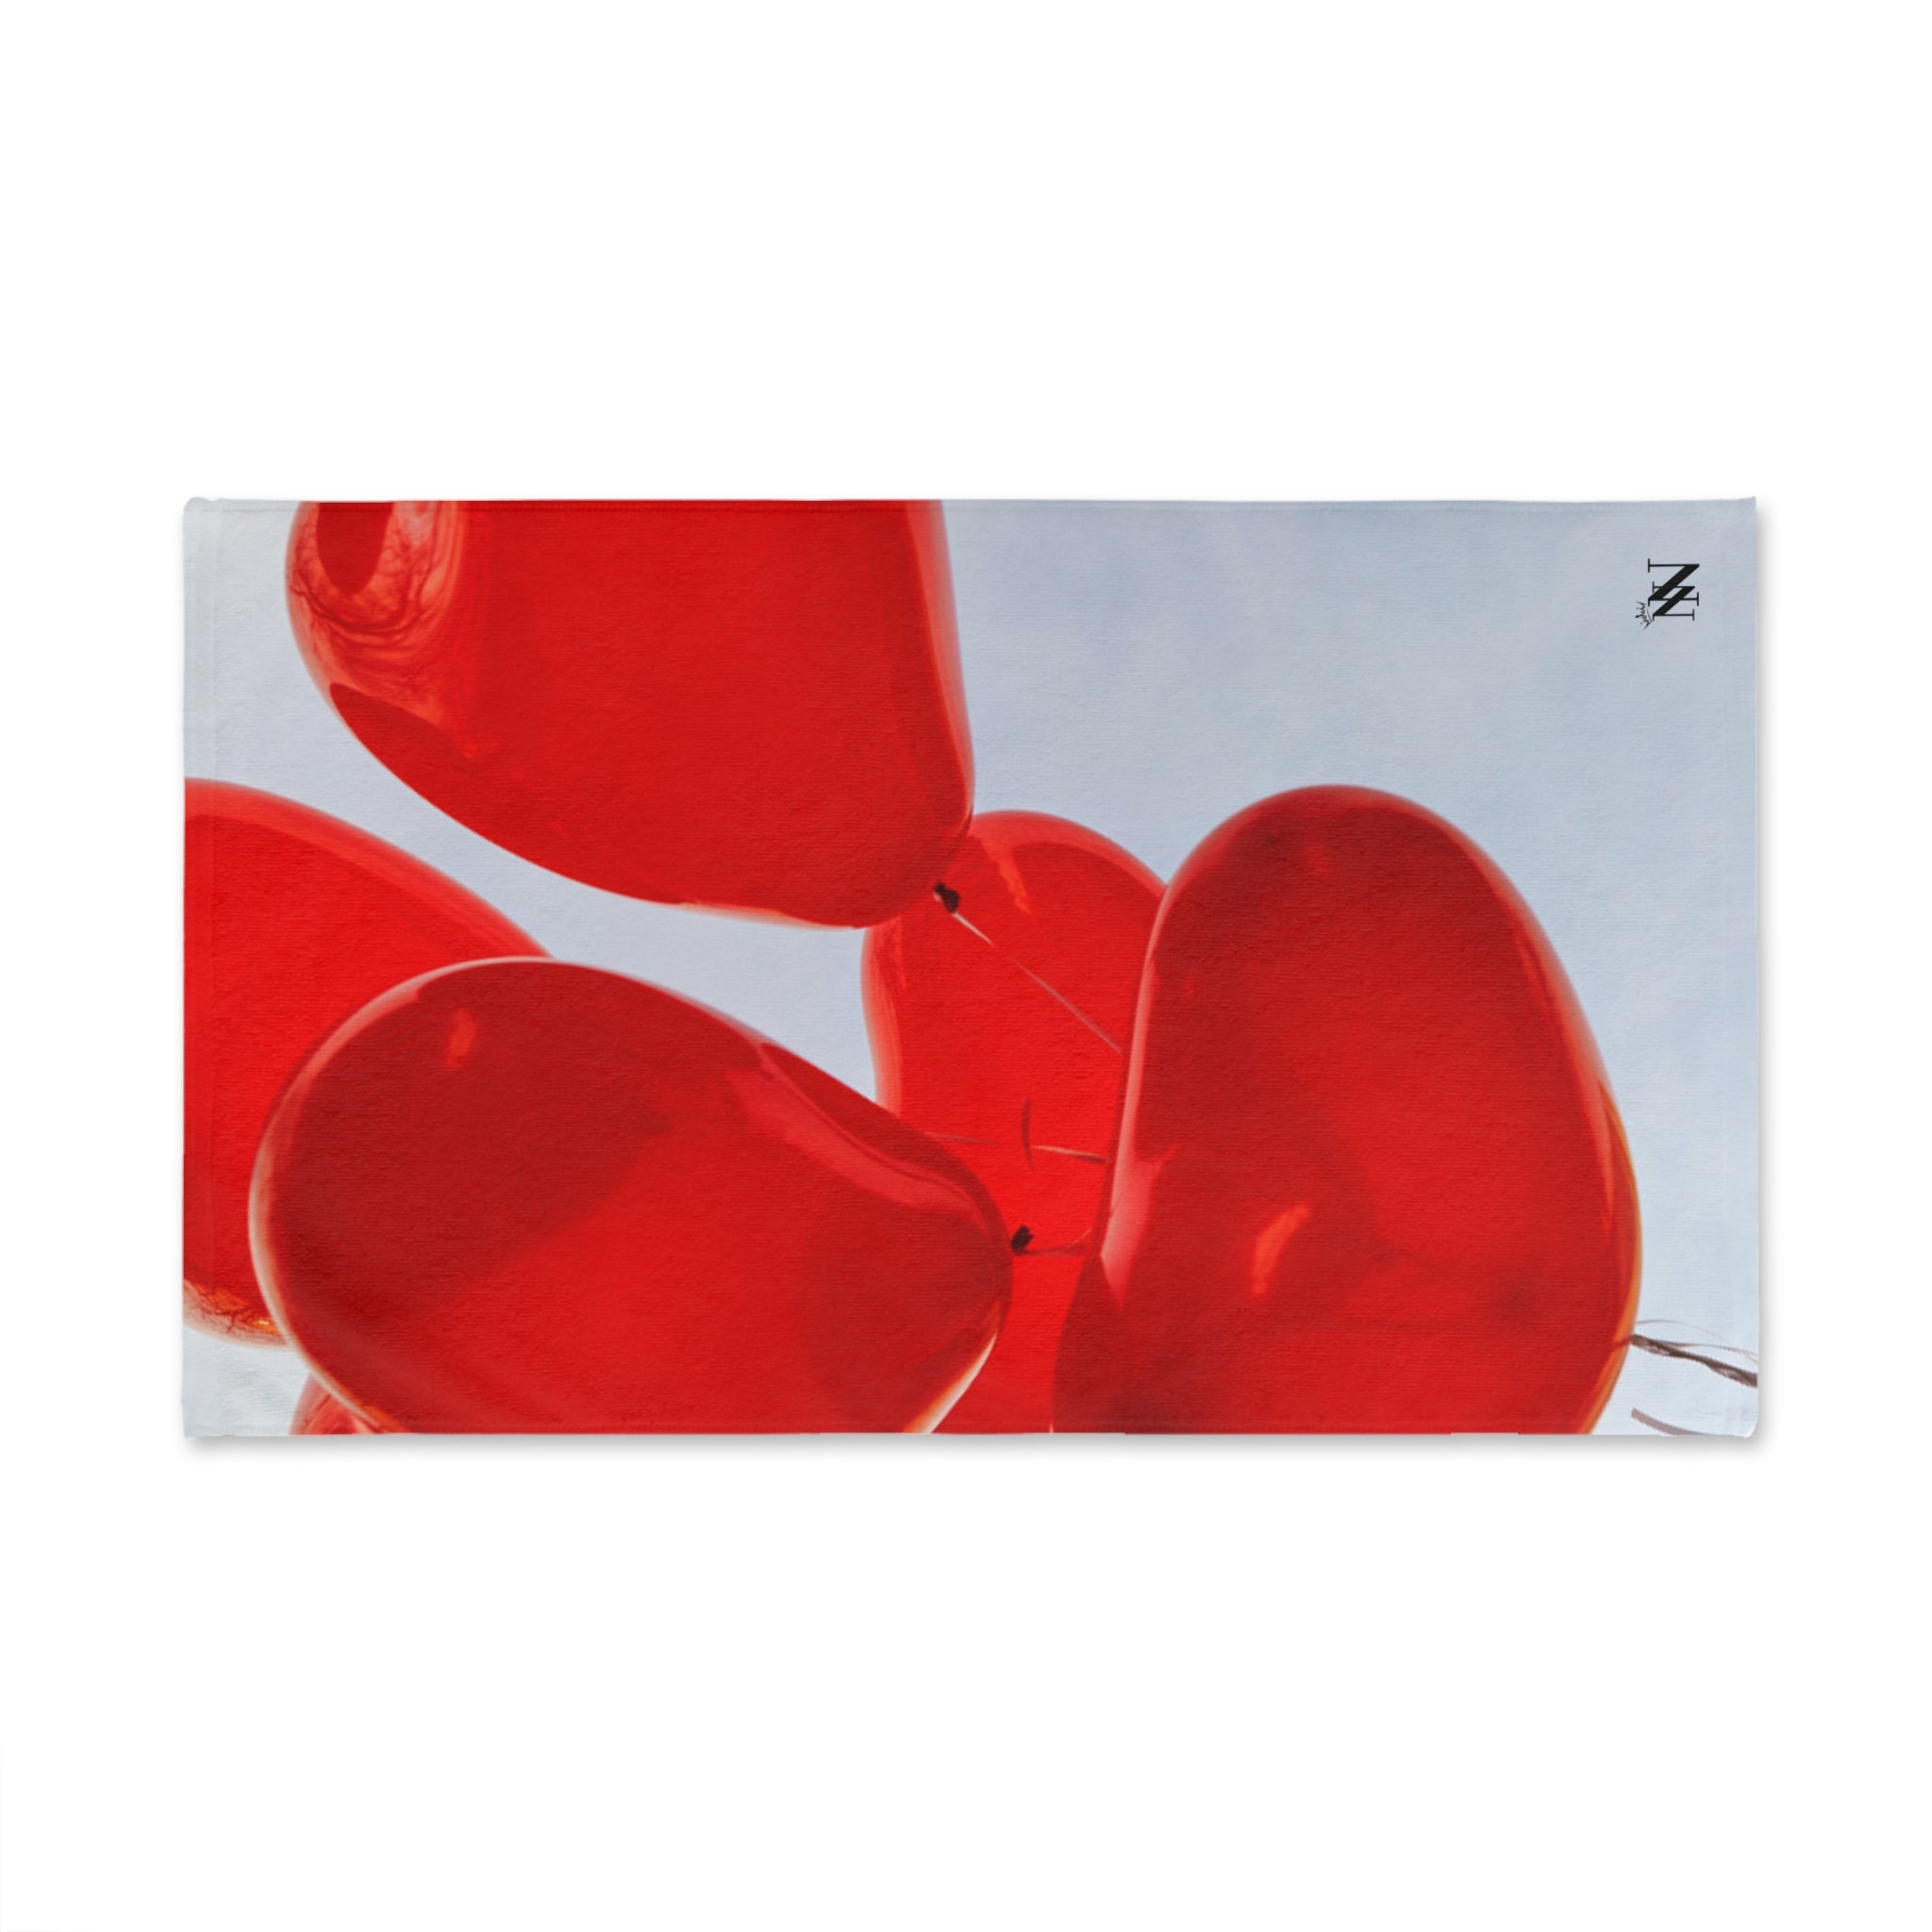 Bouquet Balloon Red White | Funny Gifts for Men - Gifts for Him - Birthday Gifts for Men, Him, Her, Husband, Boyfriend, Girlfriend, New Couple Gifts, Fathers & Valentines Day Gifts, Christmas Gifts NECTAR NAPKINS